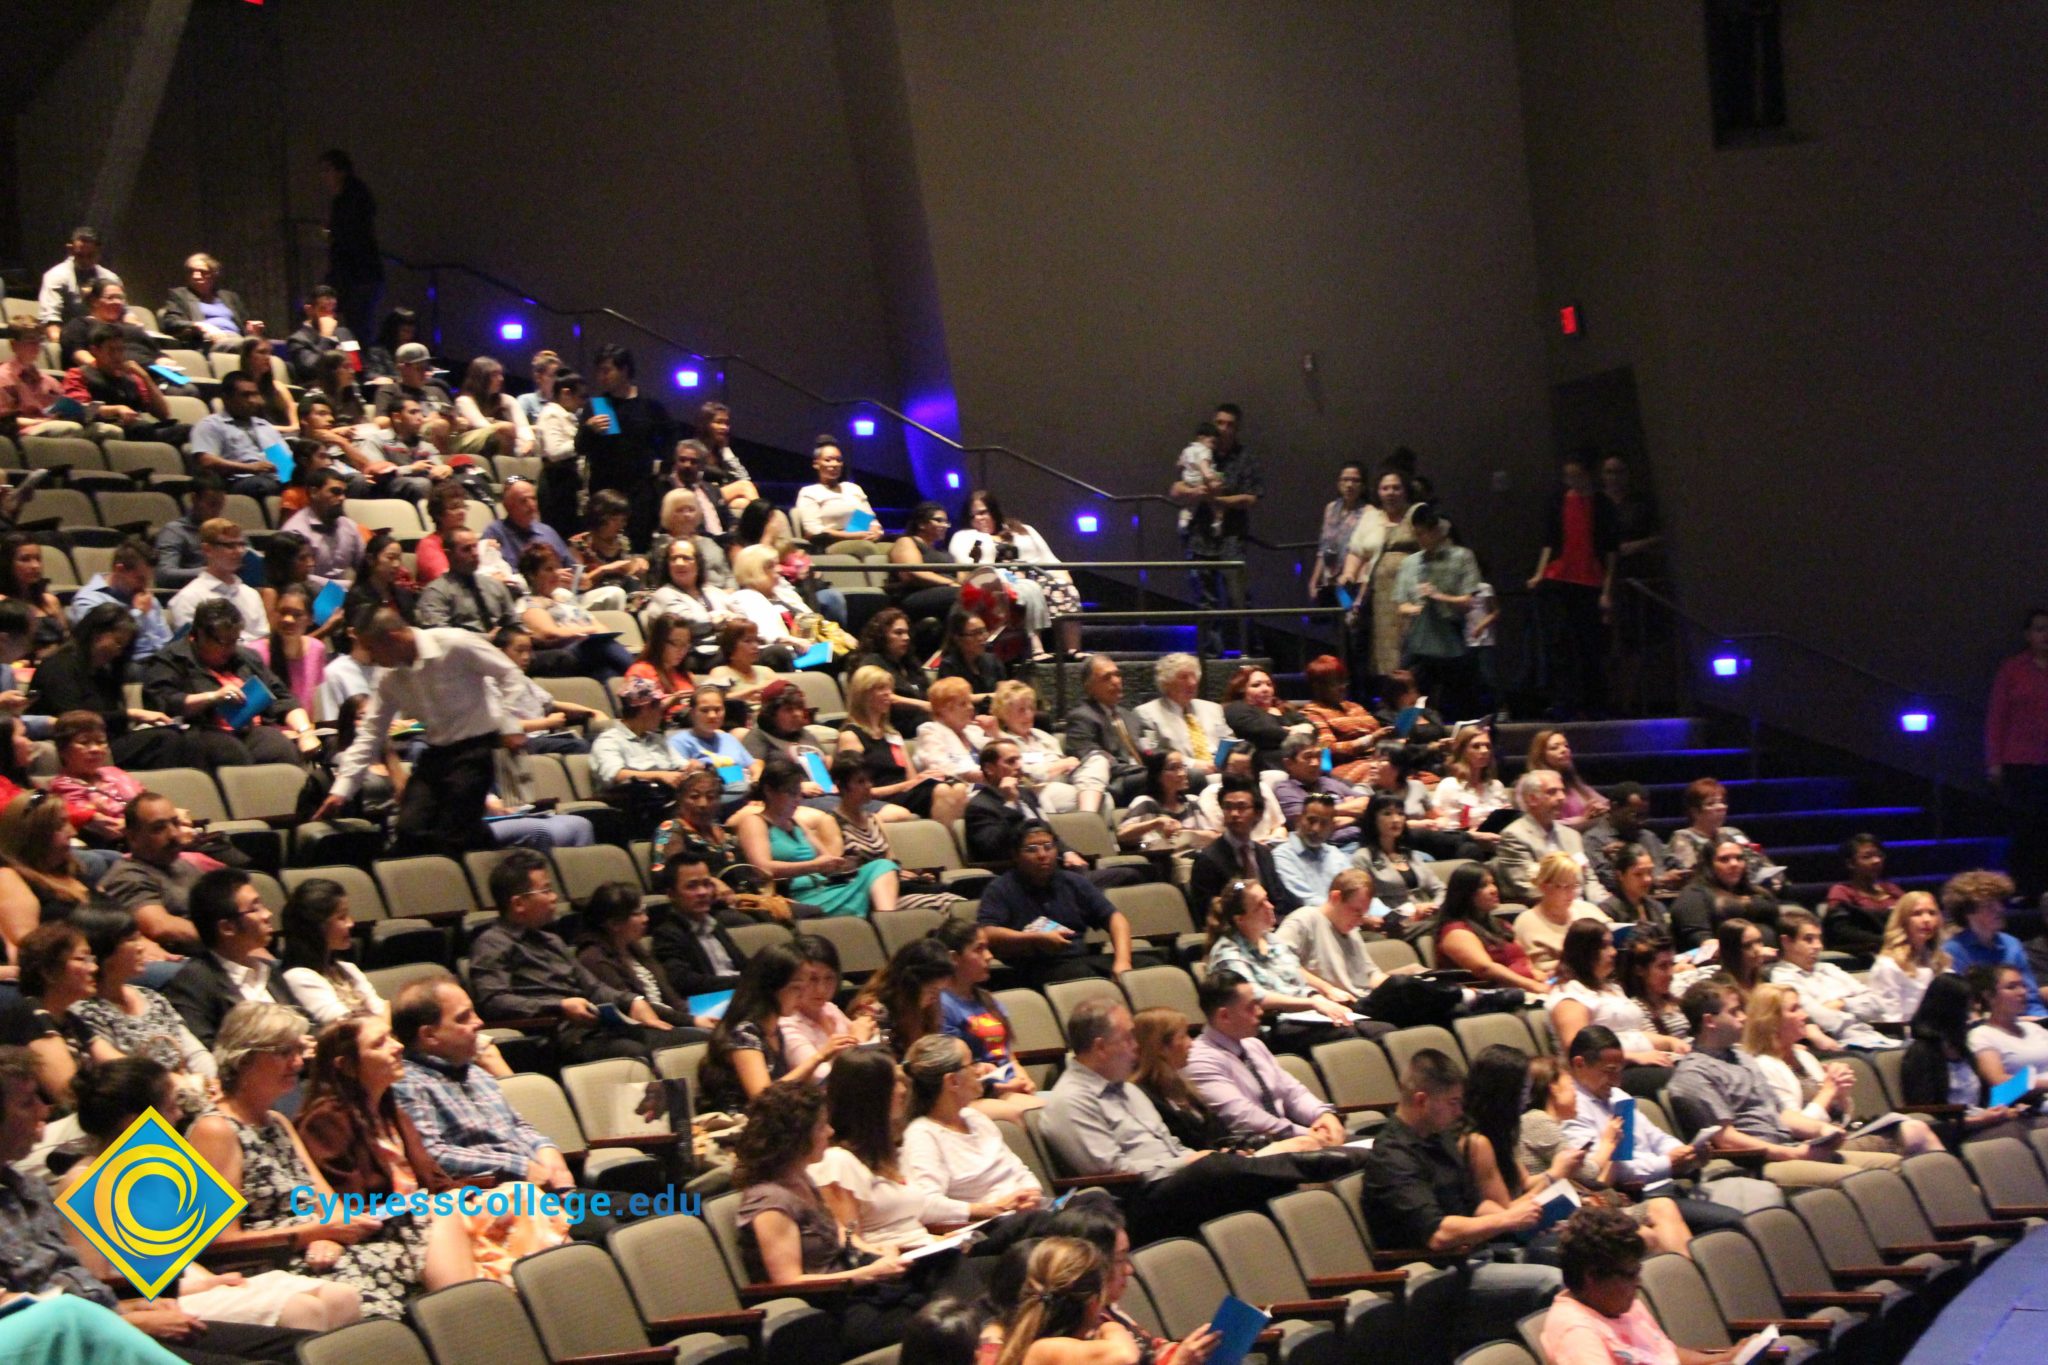 People seated in the campus theater.